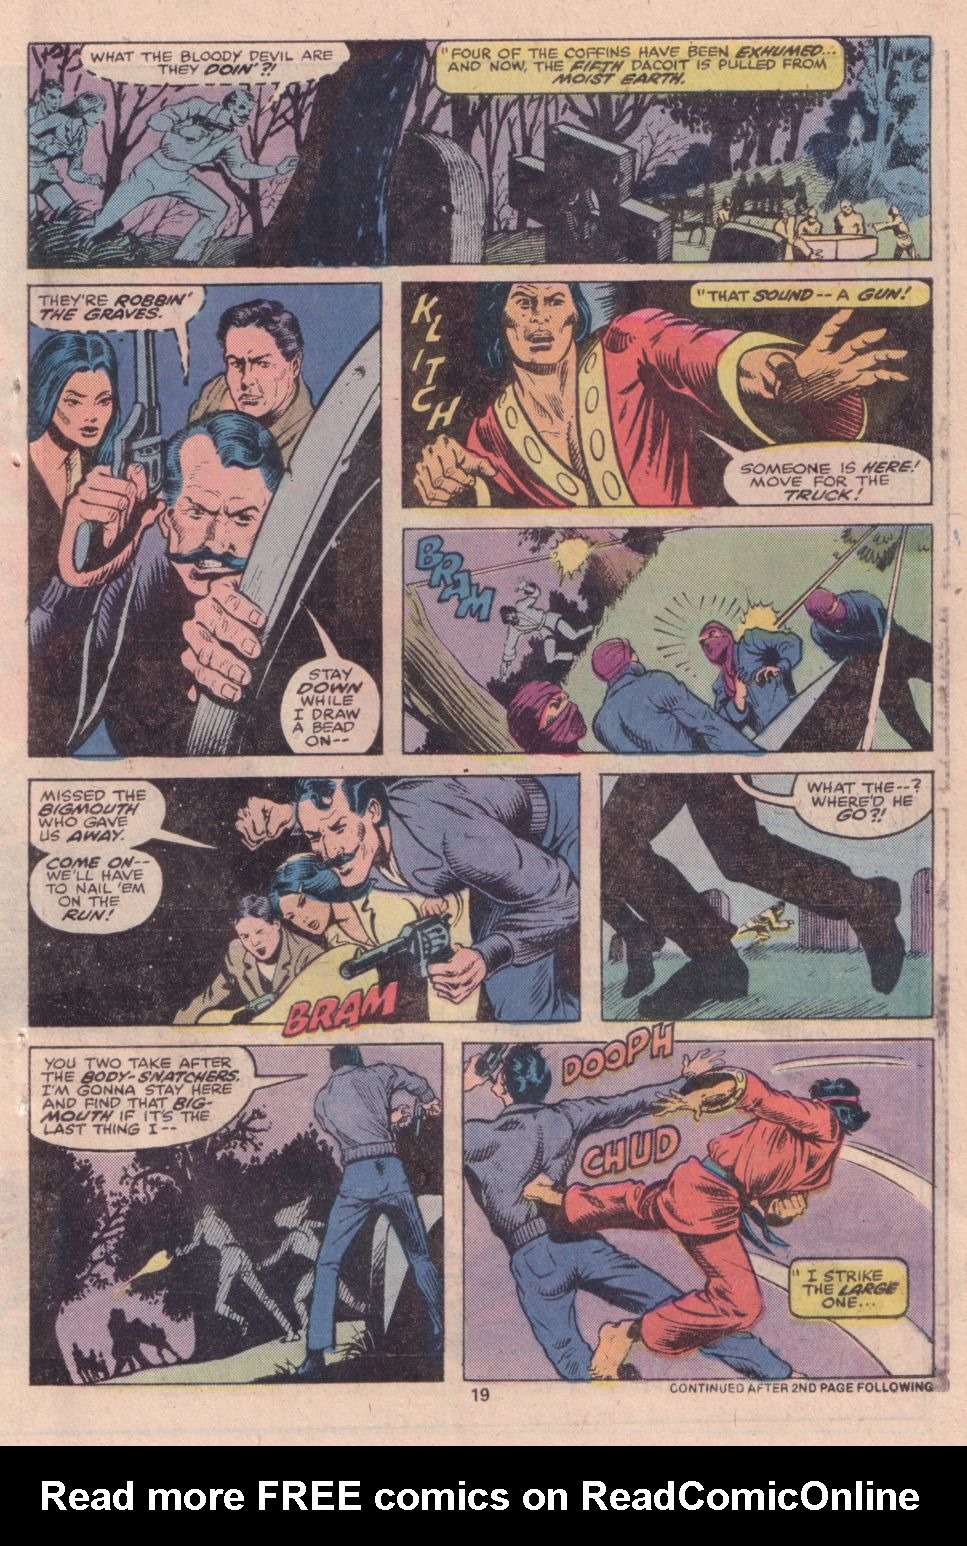 What If? (1977) issue 16 - Shang Chi Master of Kung Fu fought on The side of Fu Manchu - Page 16